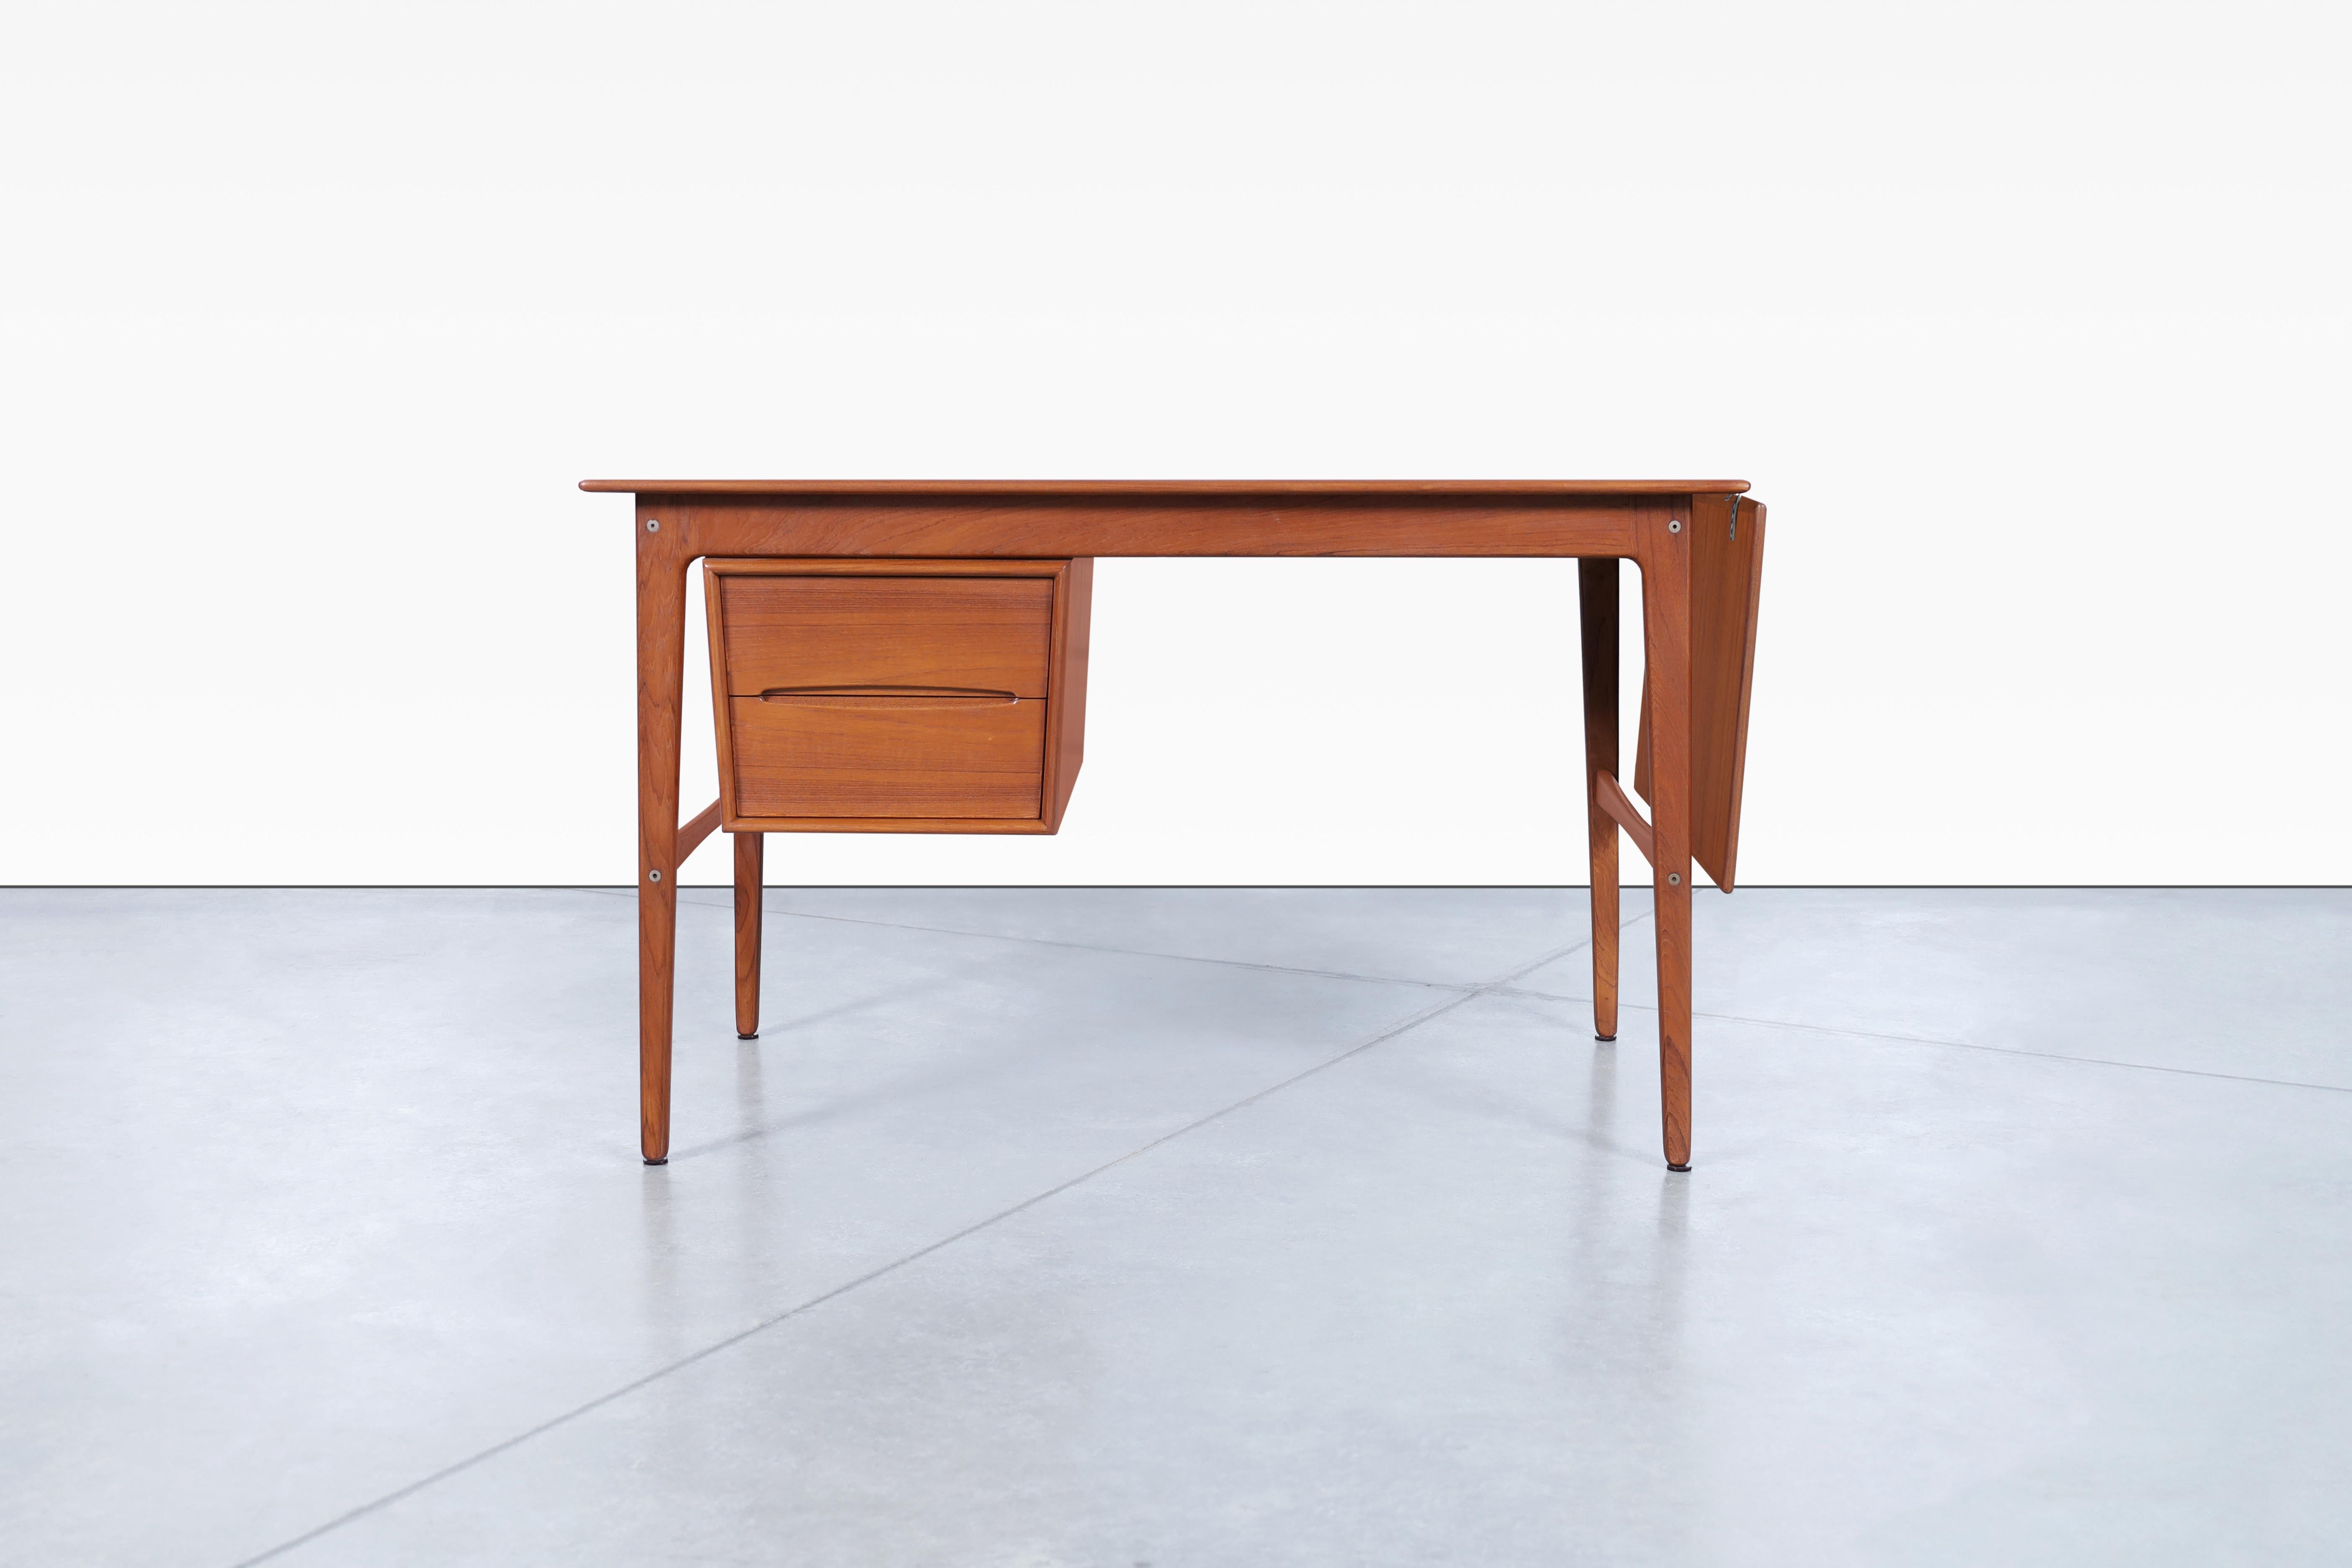 Wonderful Danish modern teak desk designed by Aksel Boll Jensen in Denmark, circa 1960’s. This gorgeous desk has been professionally refinished and features two beautifully crafted dovetail drawers. It's part of the incredible designs offered by